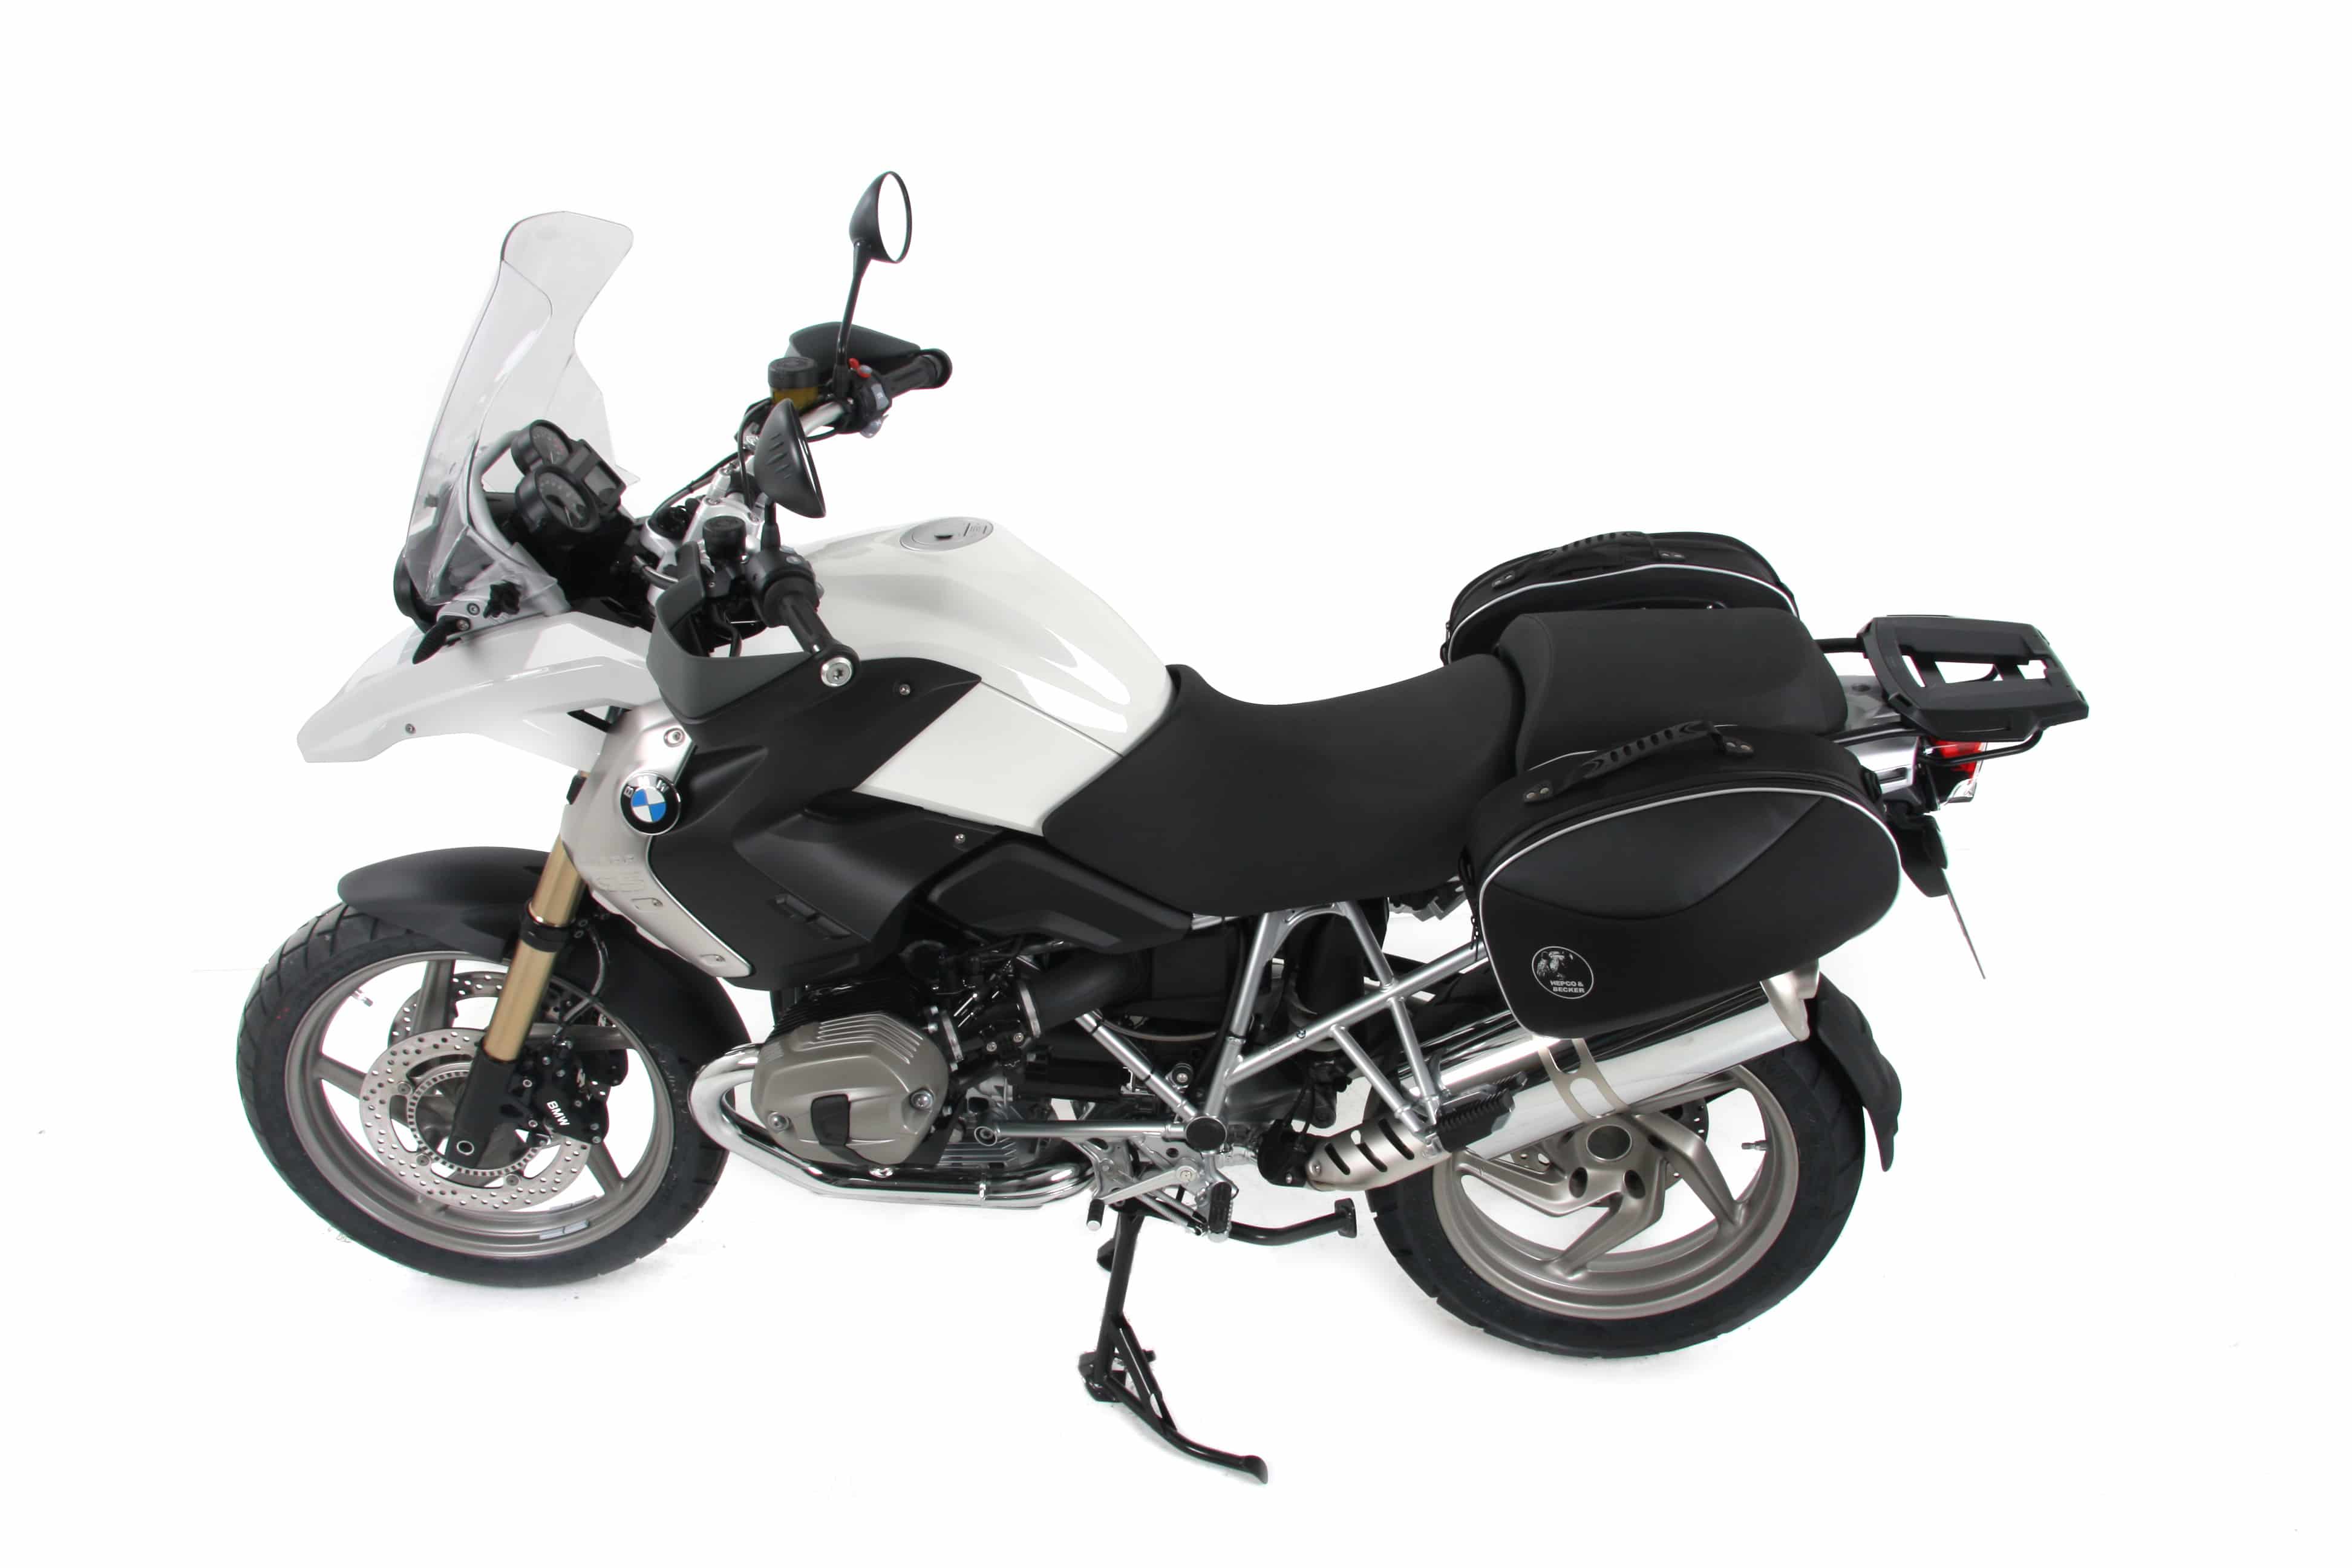 C-Bow sidecarrier for BMW R 1200 GS (2004-2012)